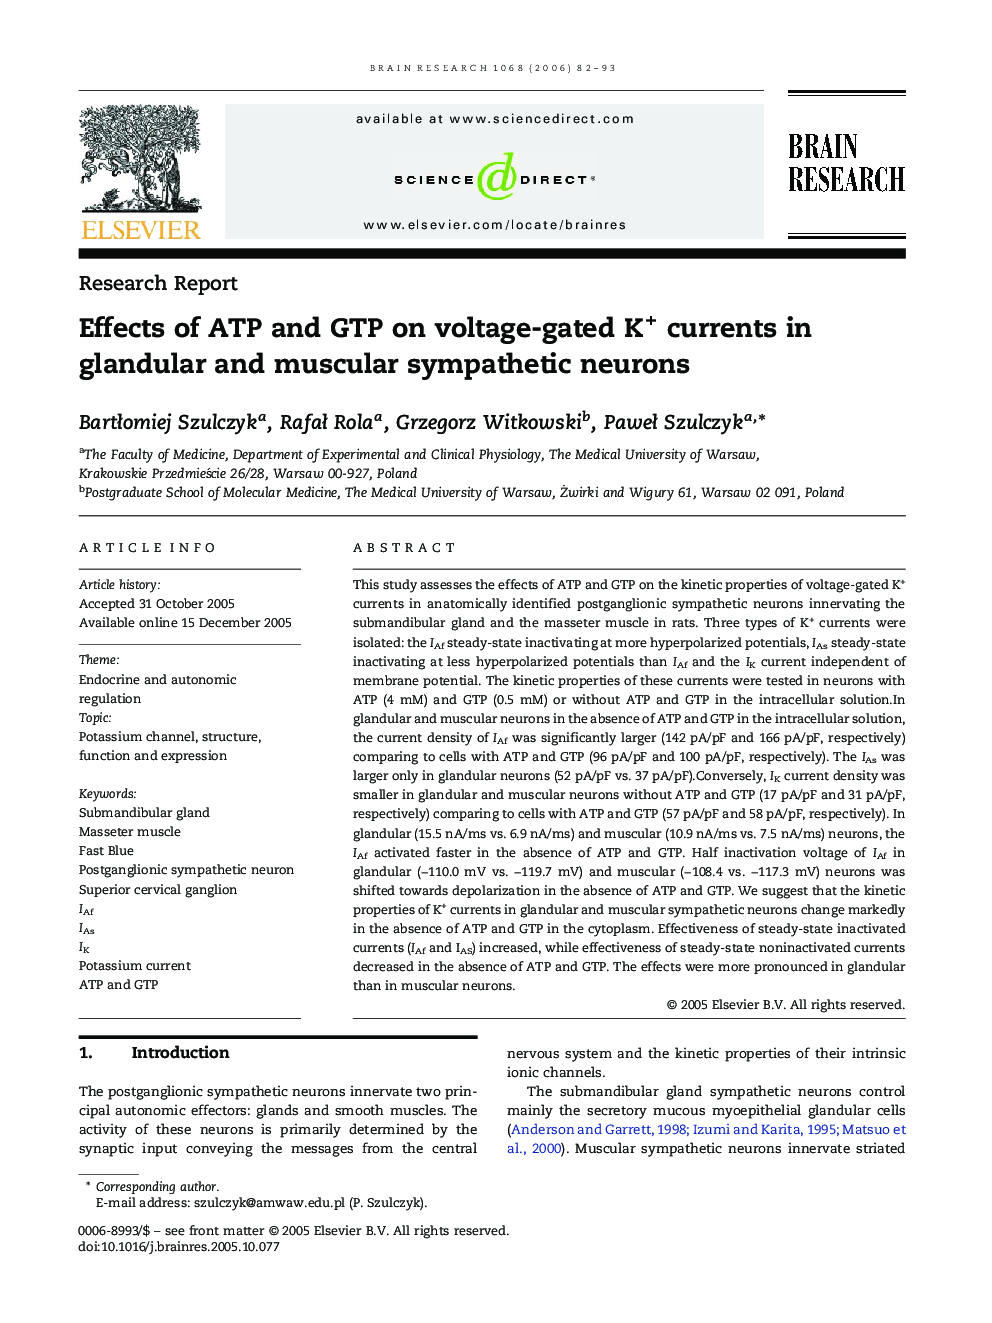 Effects of ATP and GTP on voltage-gated K+ currents in glandular and muscular sympathetic neurons